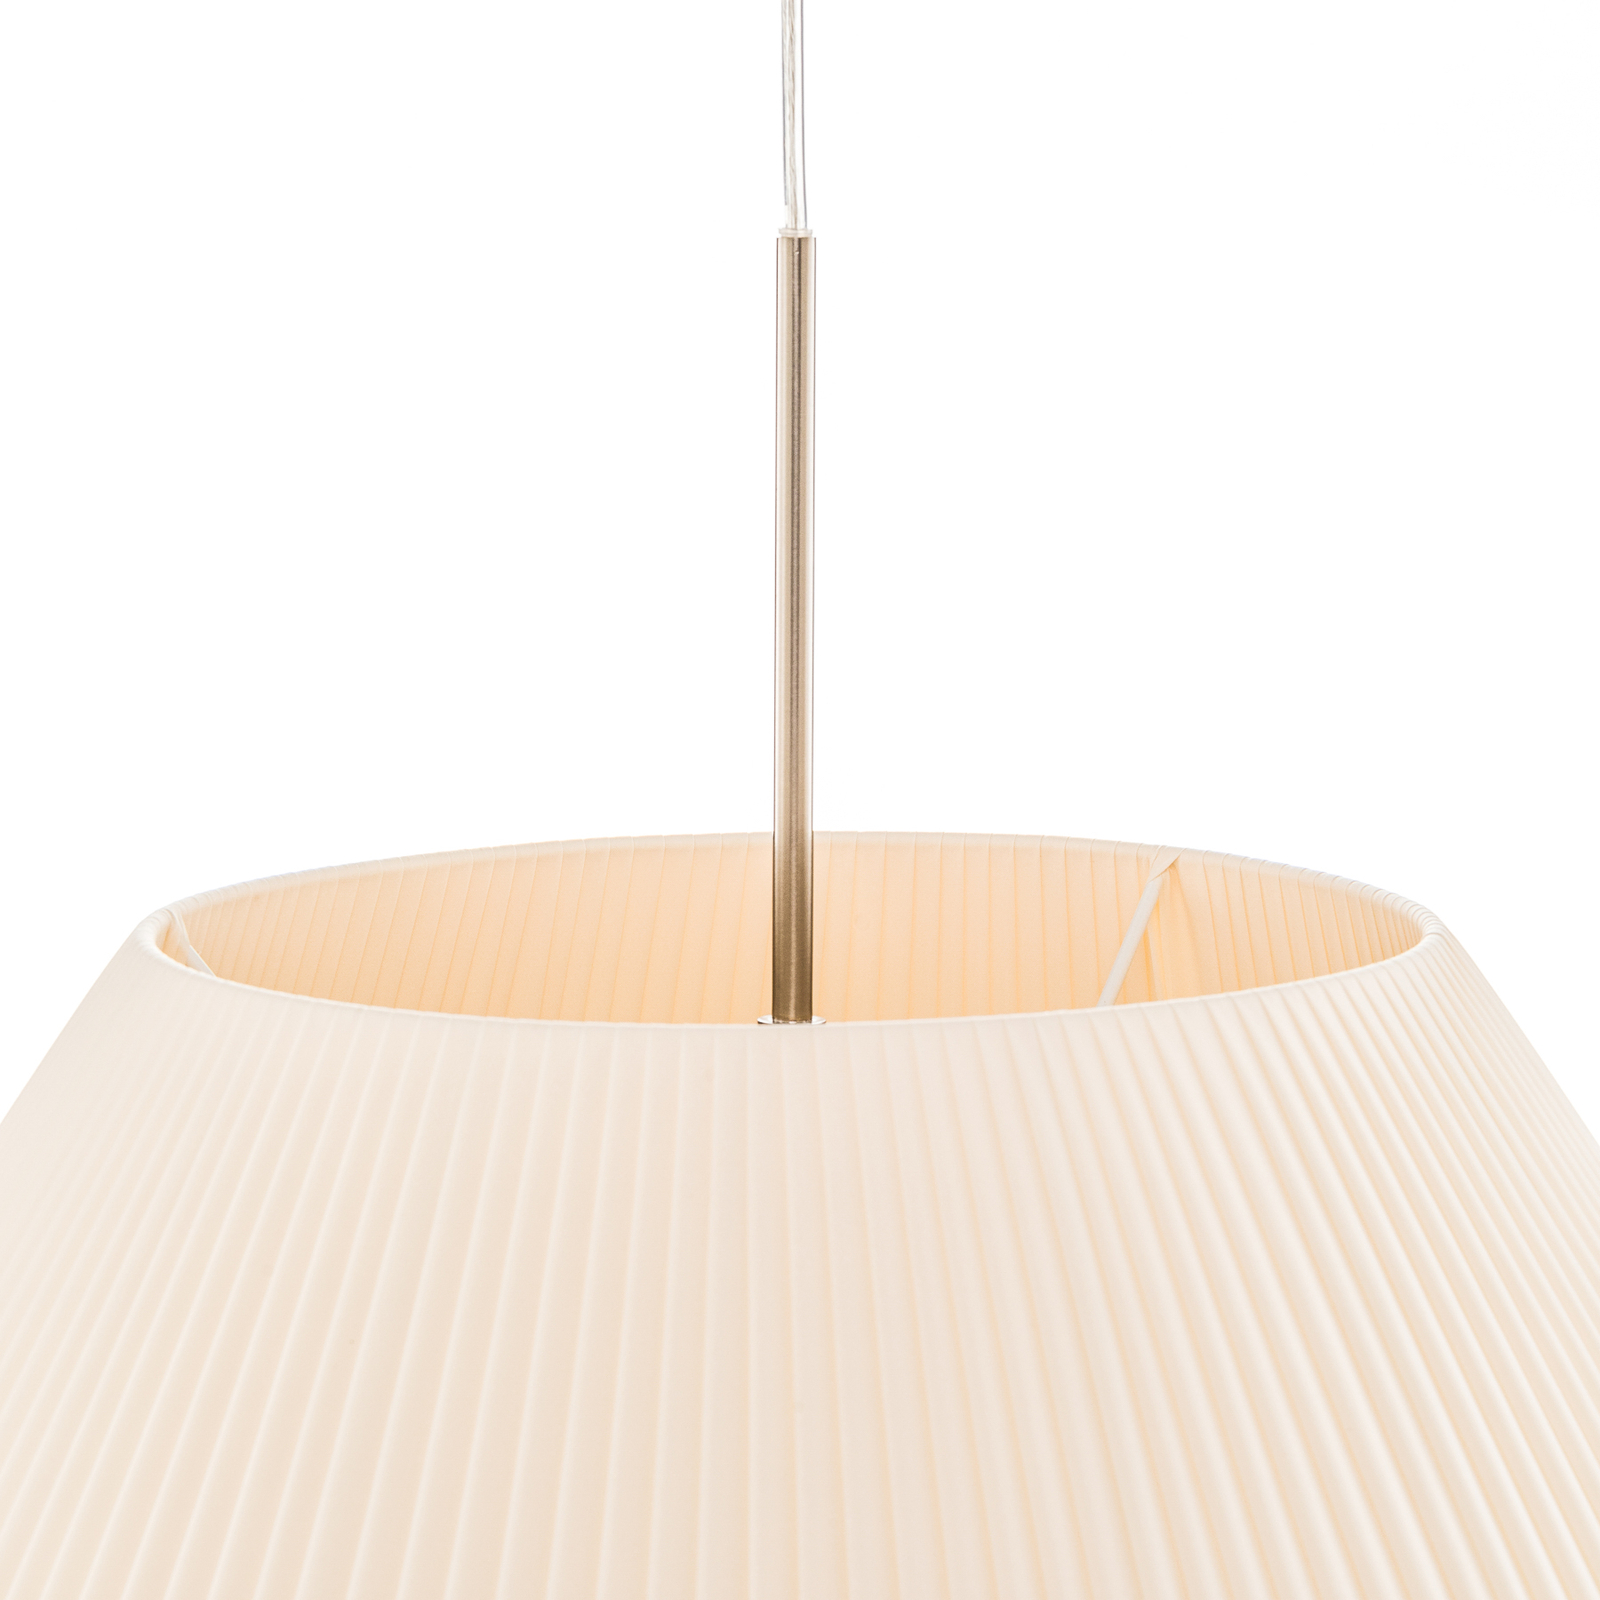 Bover Mei 60 - ronde stof-hanglamp in crème